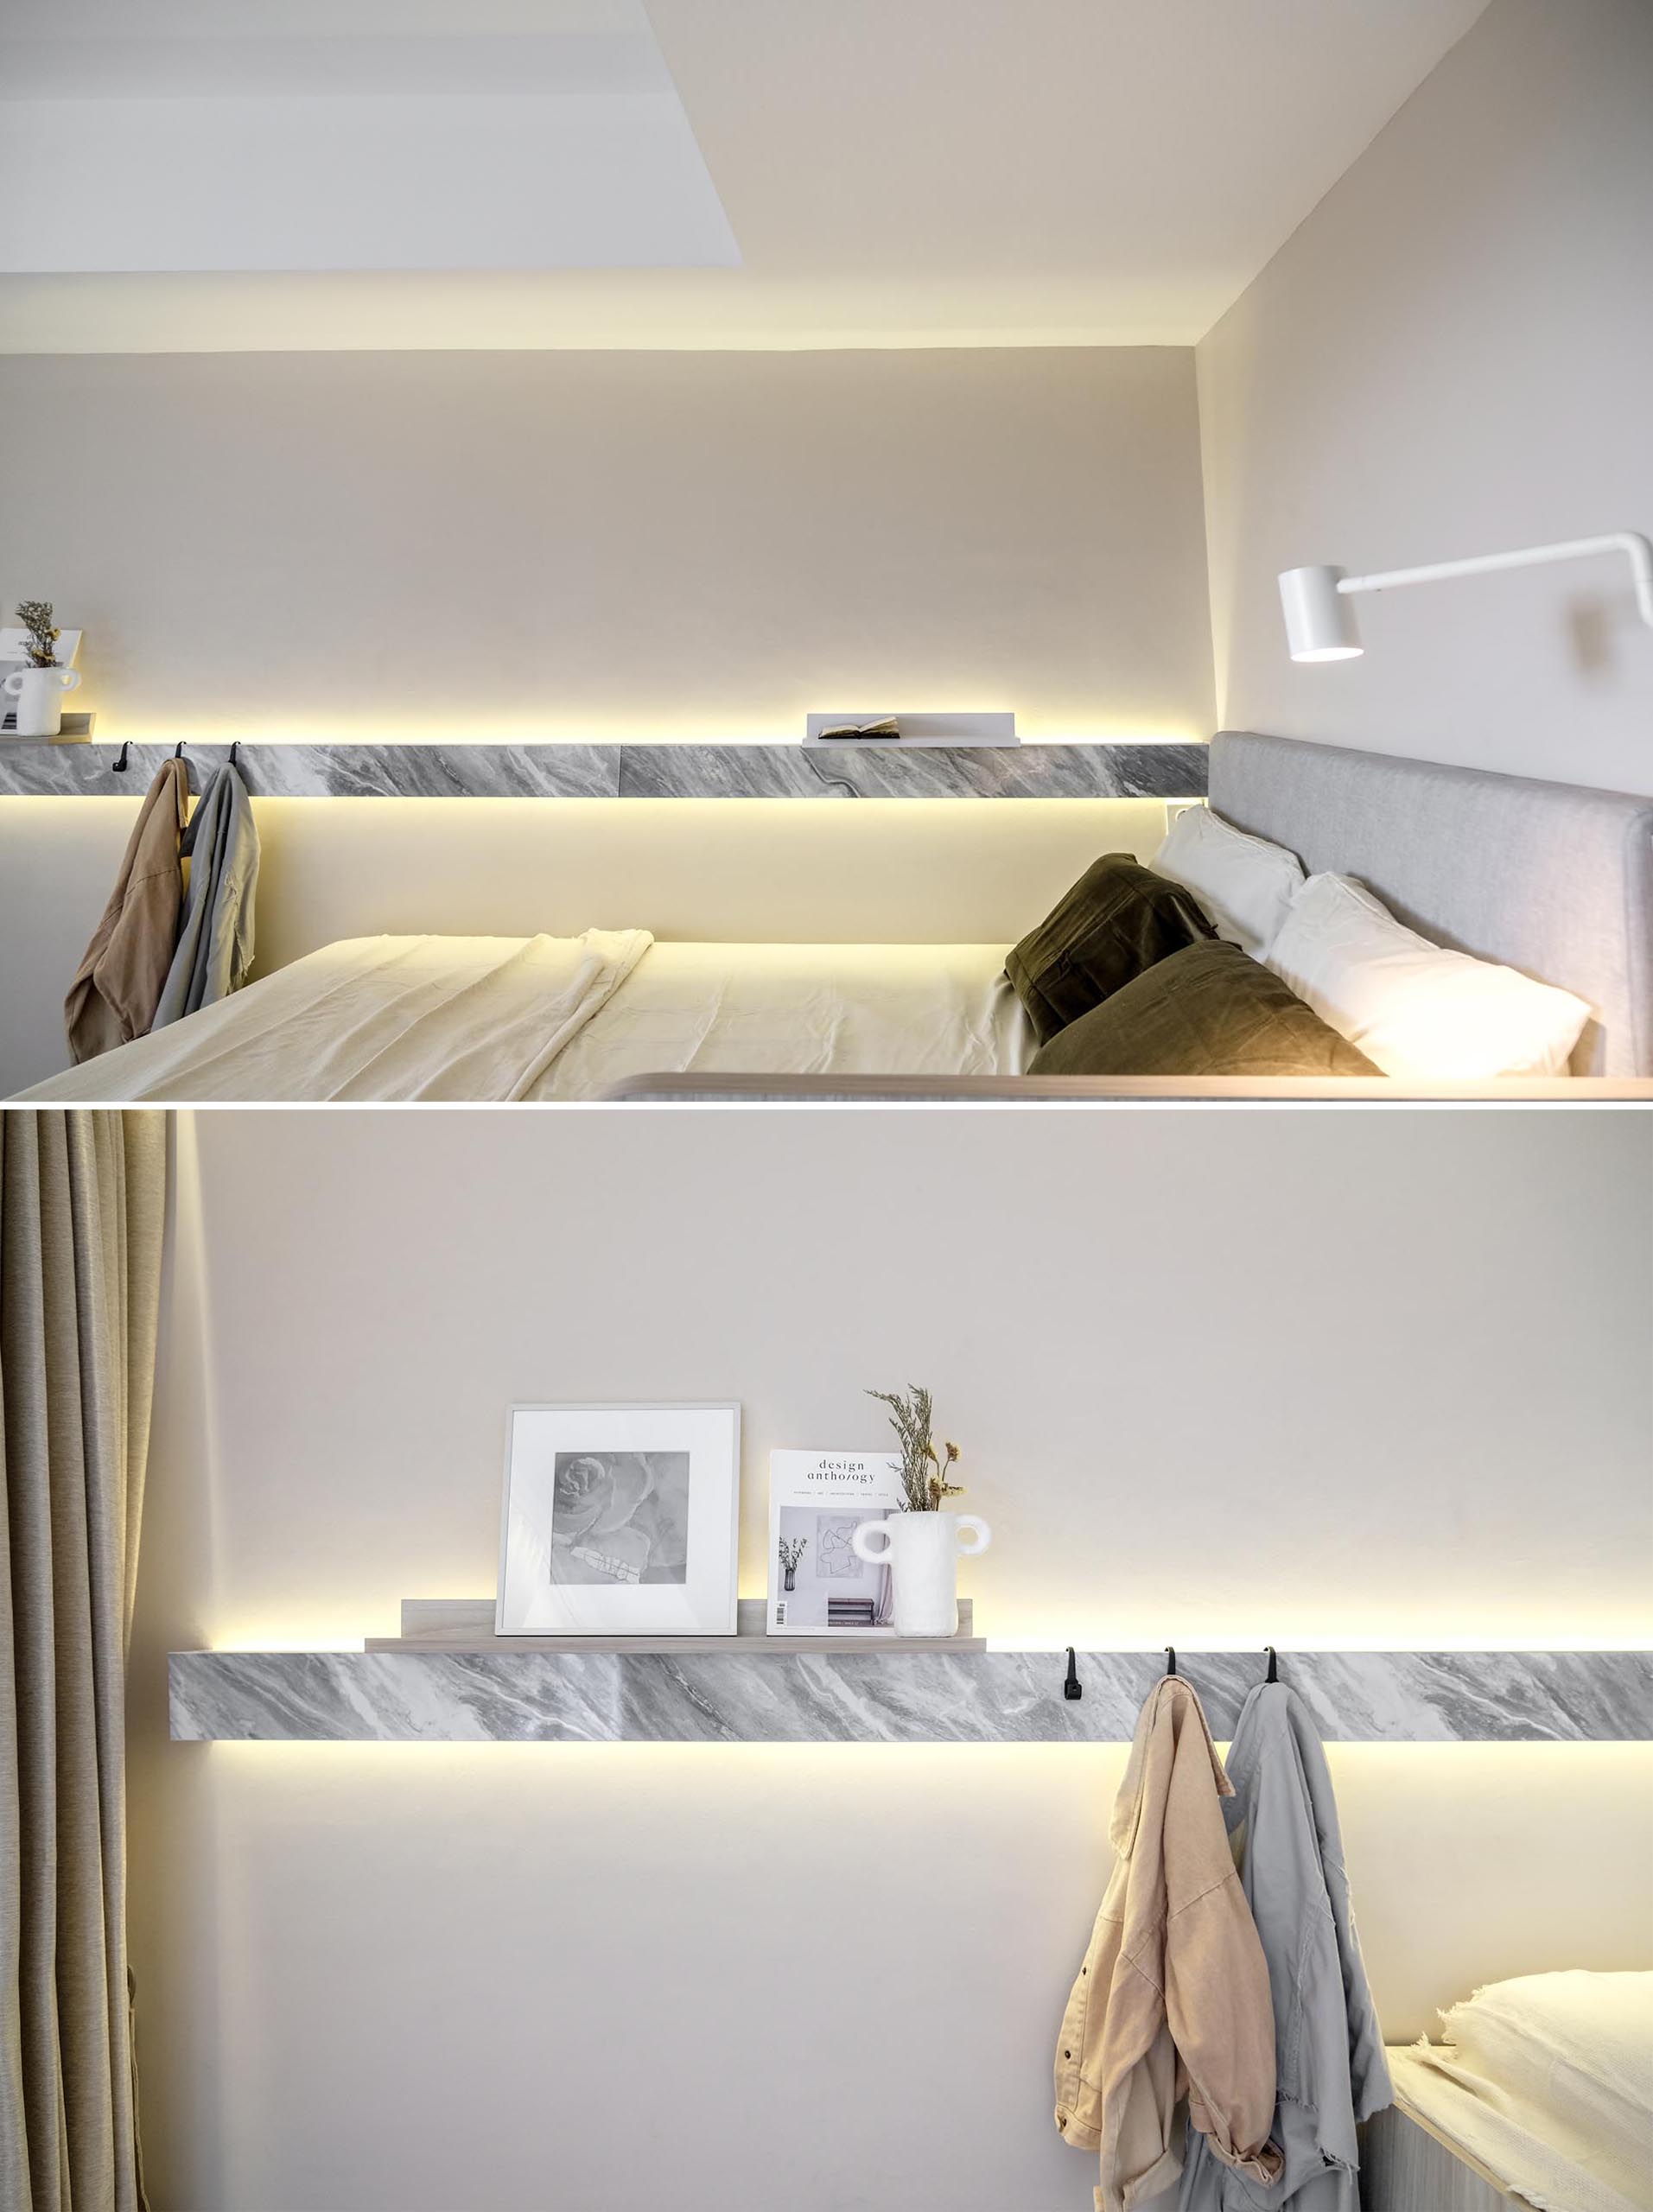 Running along the length of the bed in this micro apartment, is a small linear shelf that includes hidden lighting, allowing a soft glow to line the wall.